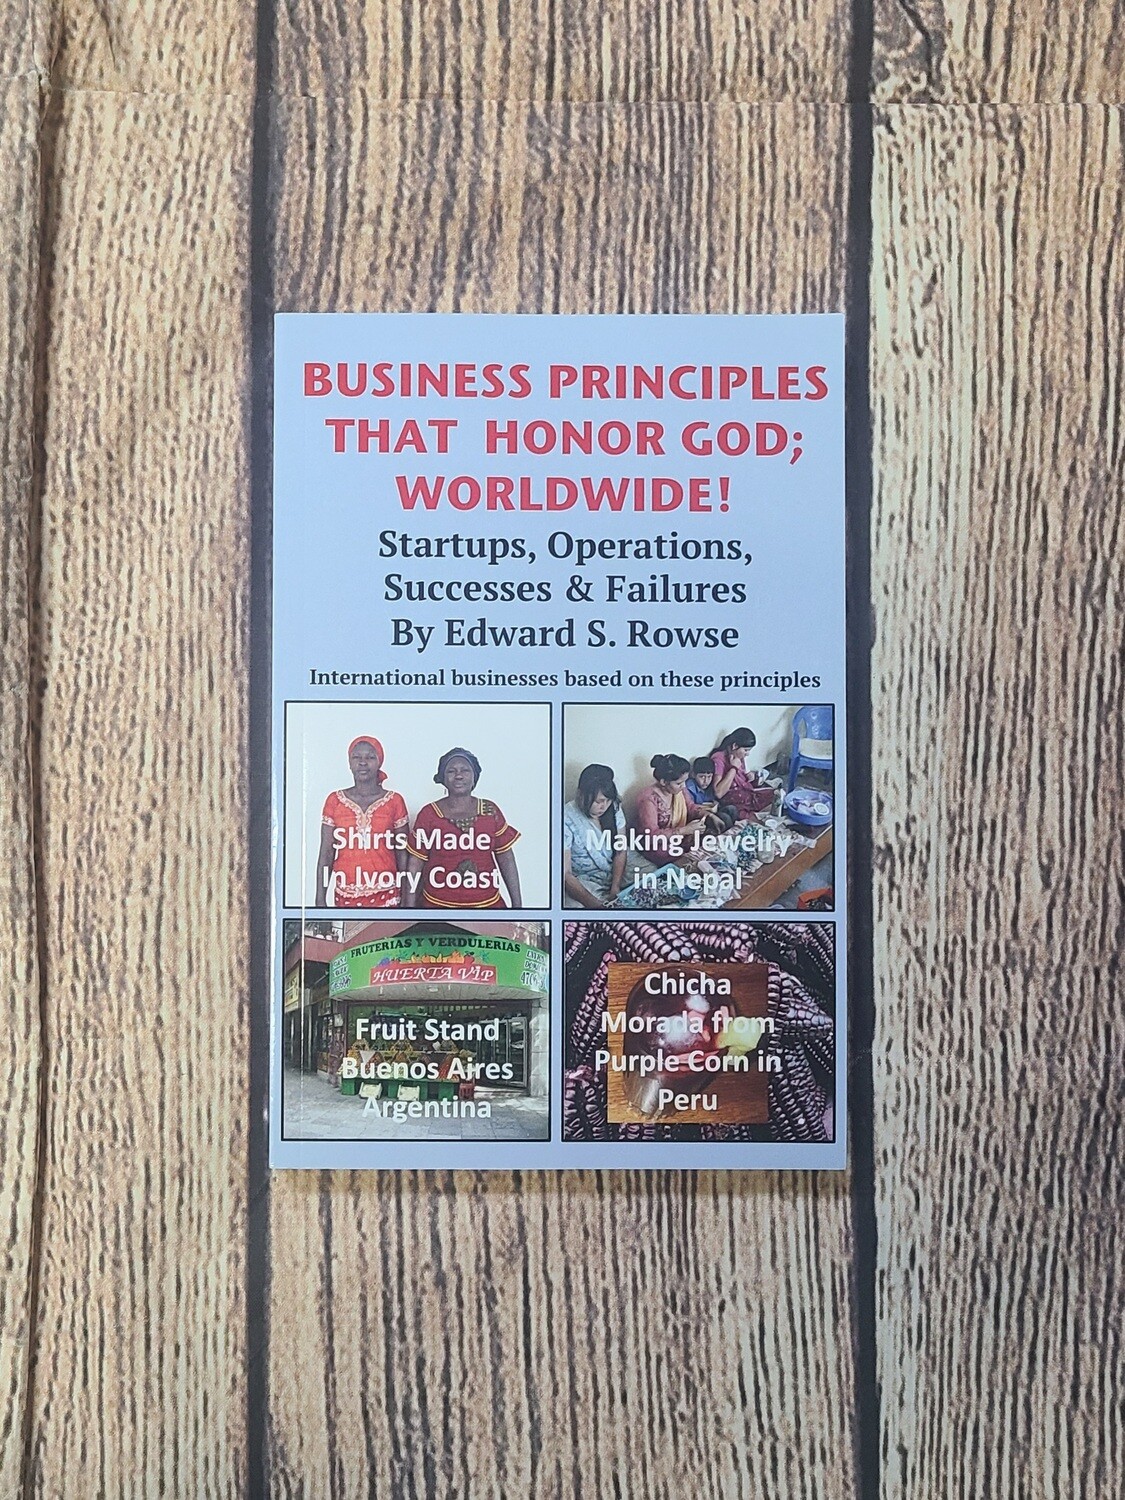 Business Principles That Honor God; Worldwide! - Startups, Operations, Successes, and Failures by Edward S. Rowse